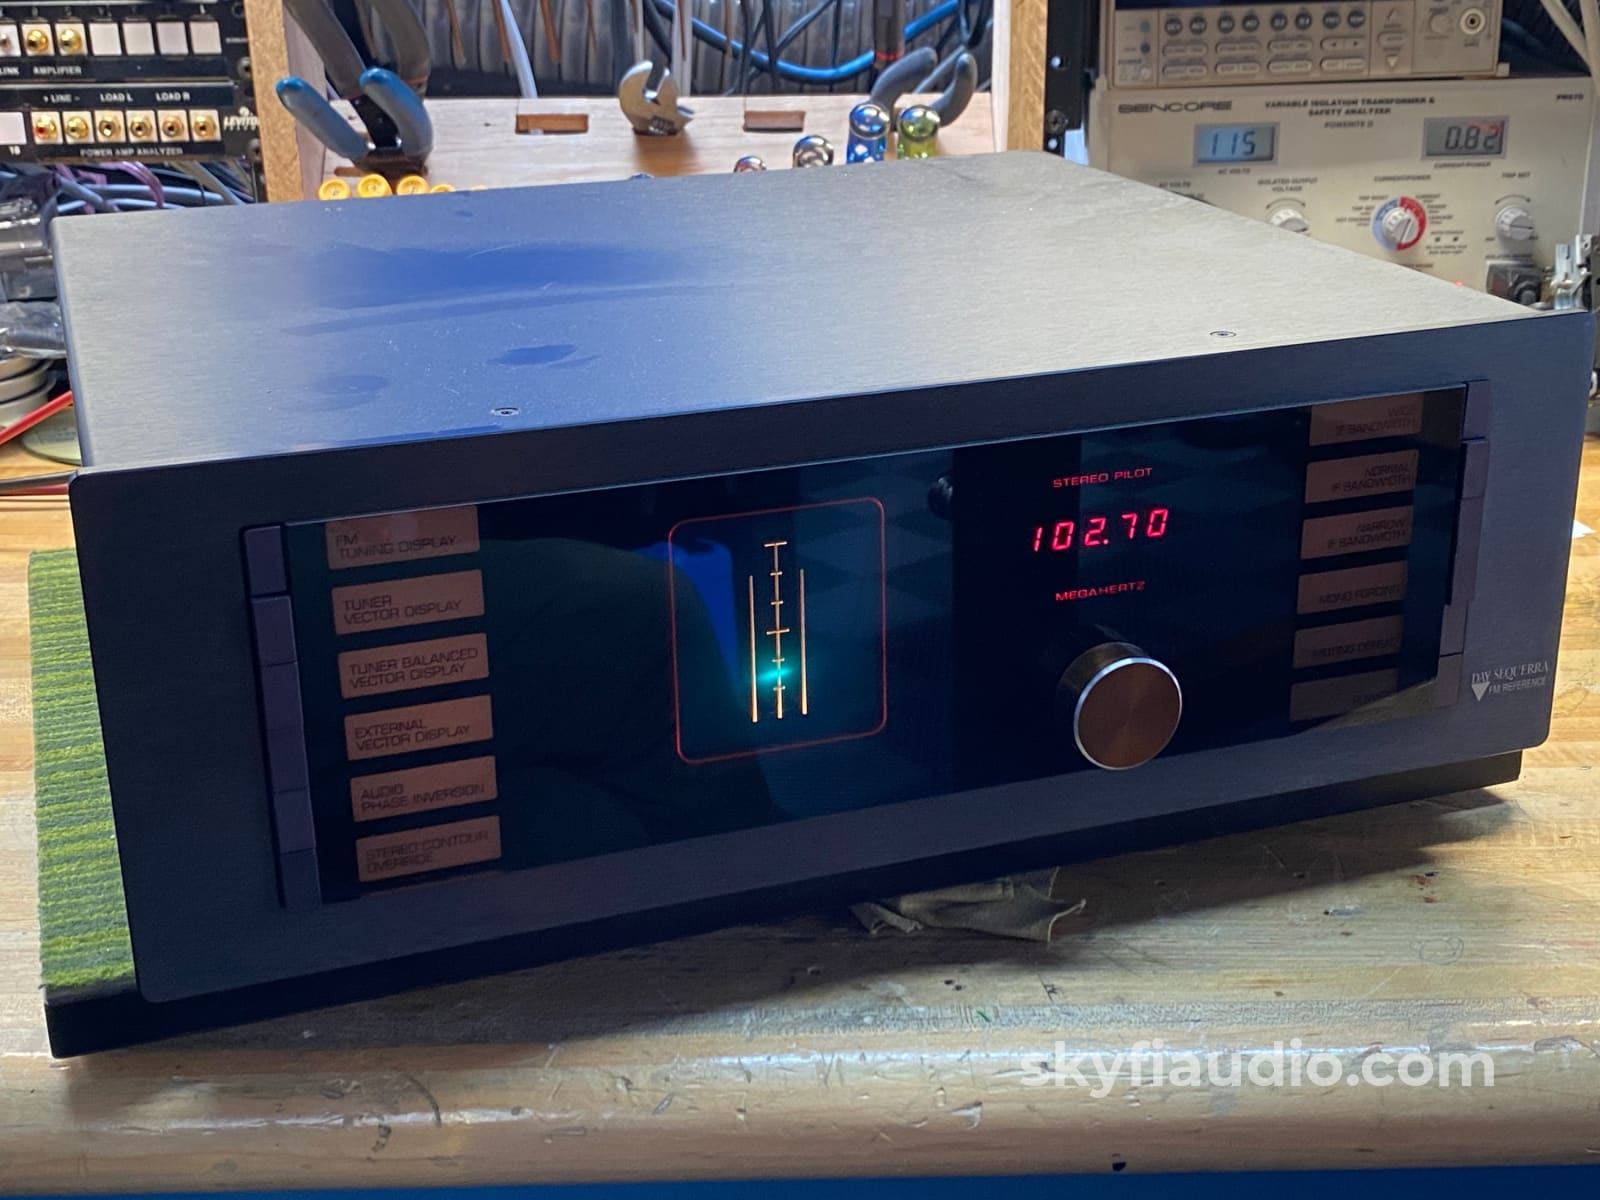 Day Sequerra Fm Reference Tuner - The Best!